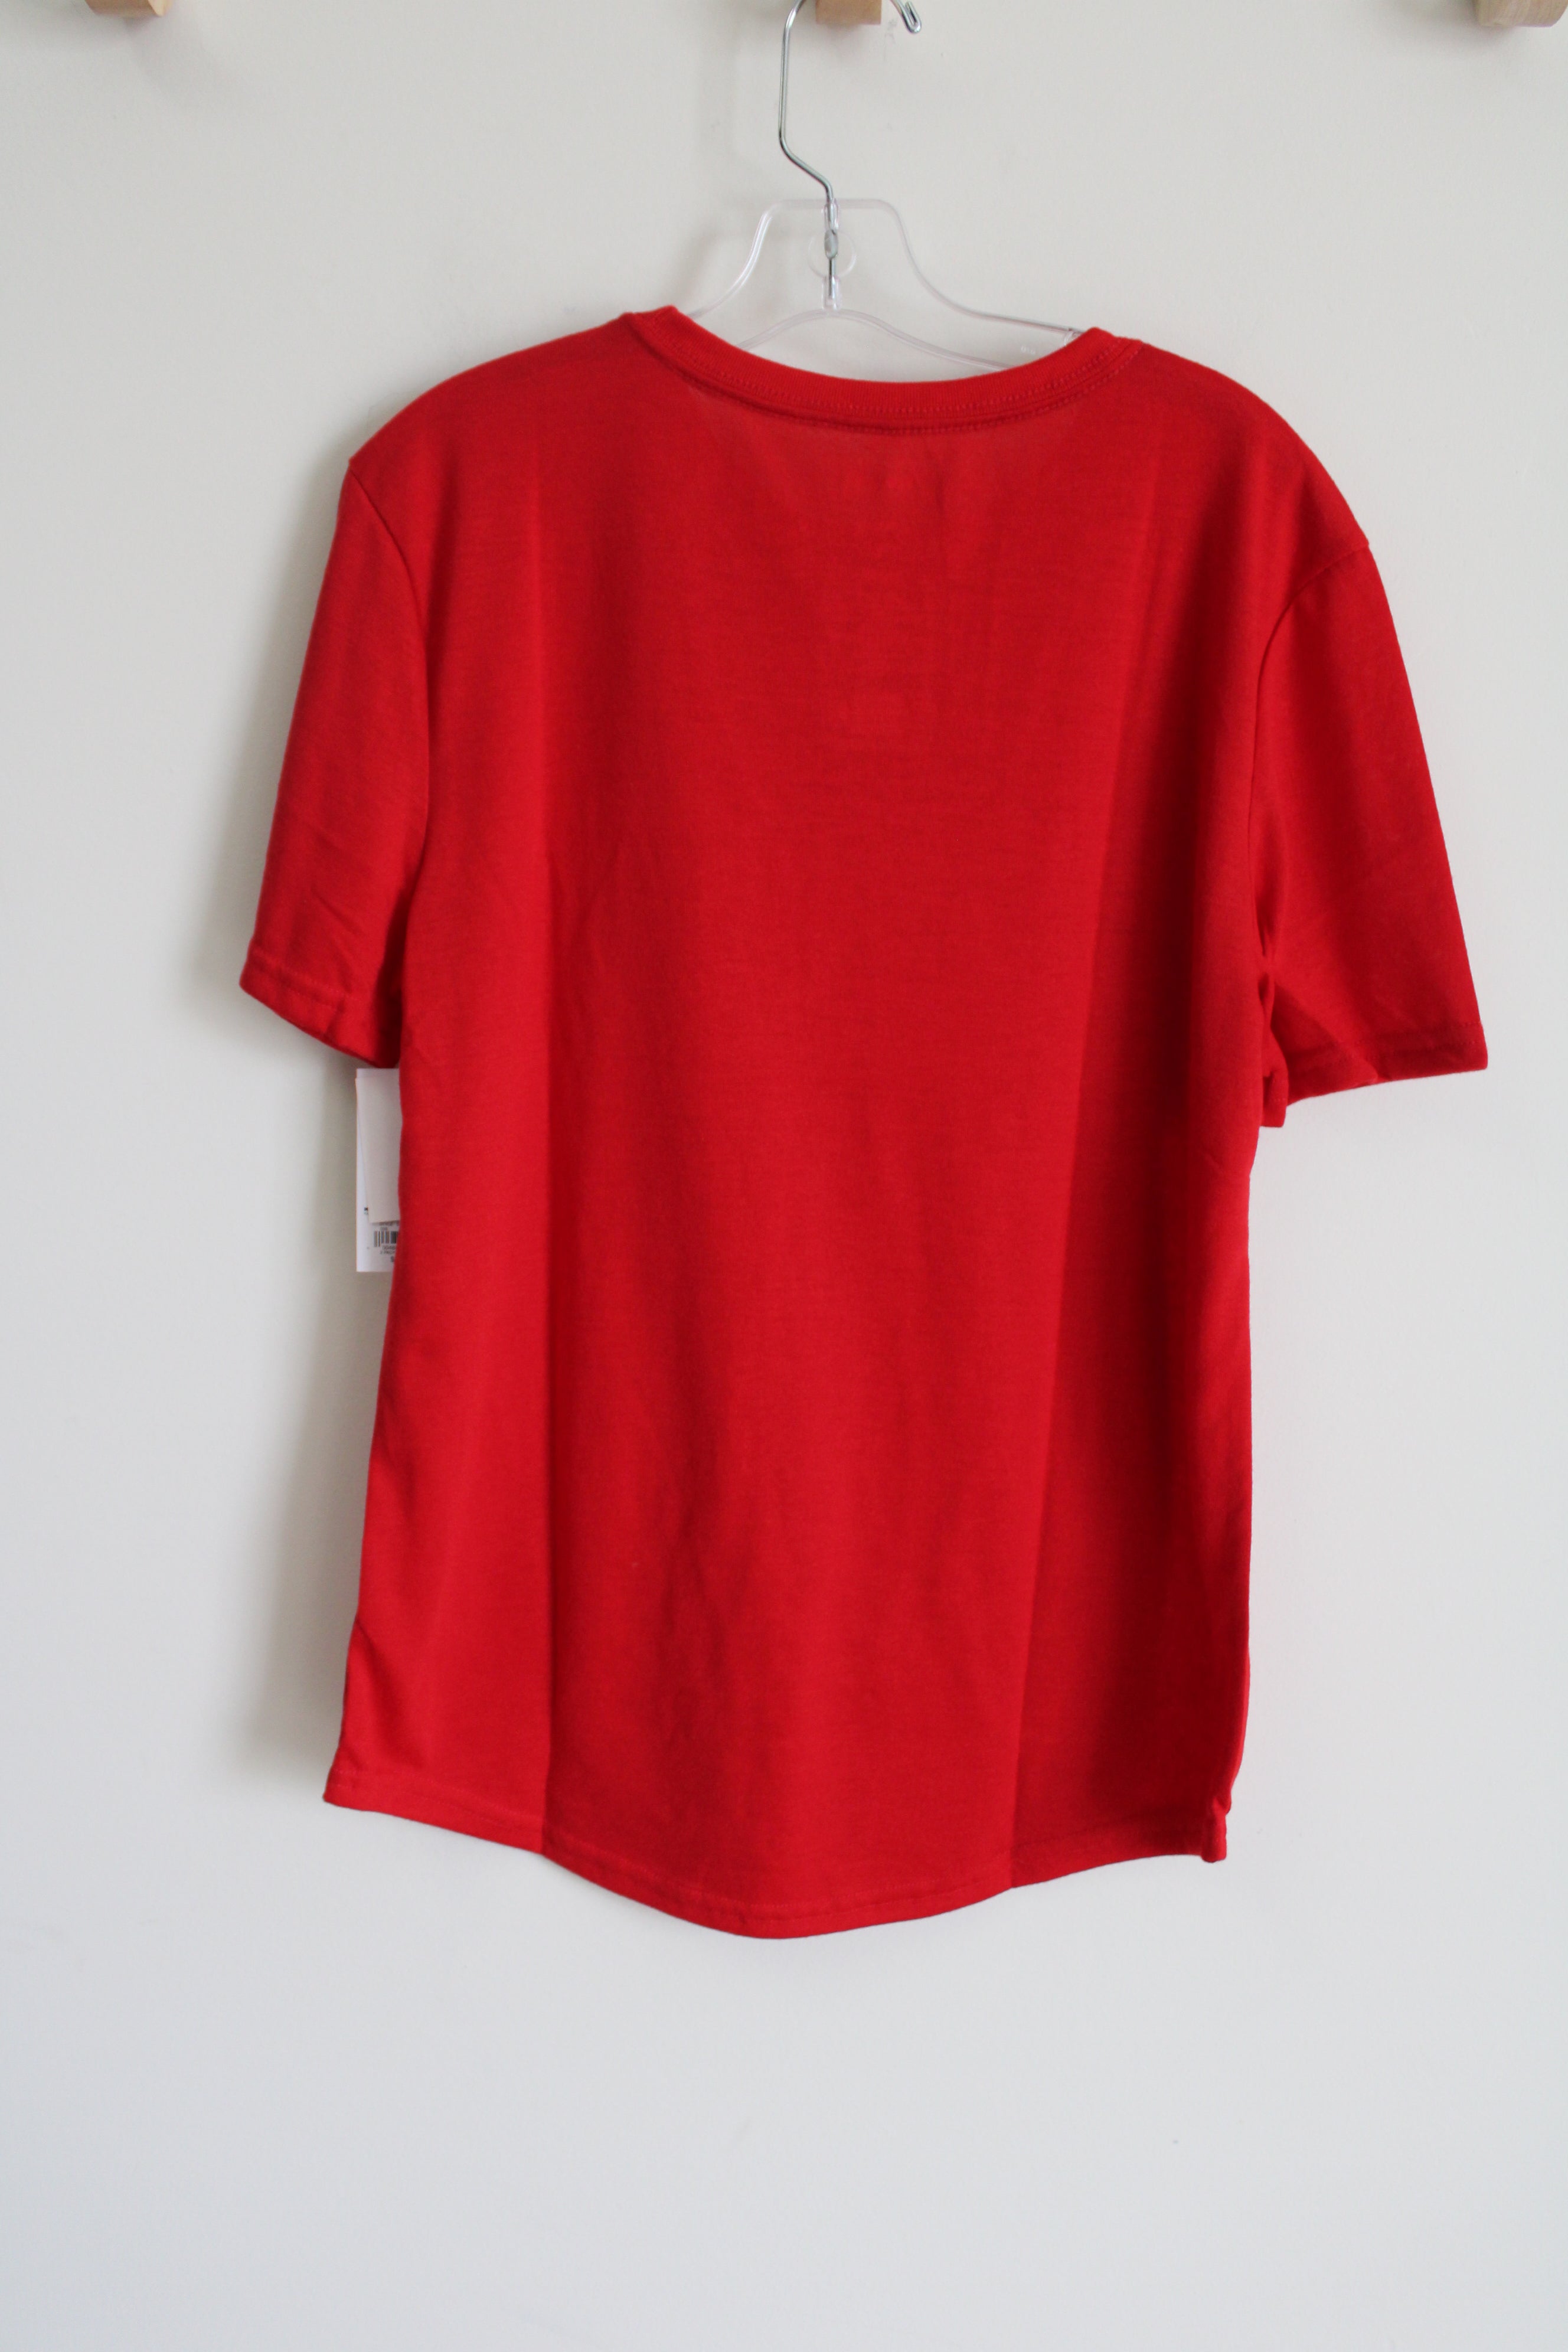 NEW Sonoma Pajama Red Tee | Youth L (14/16)